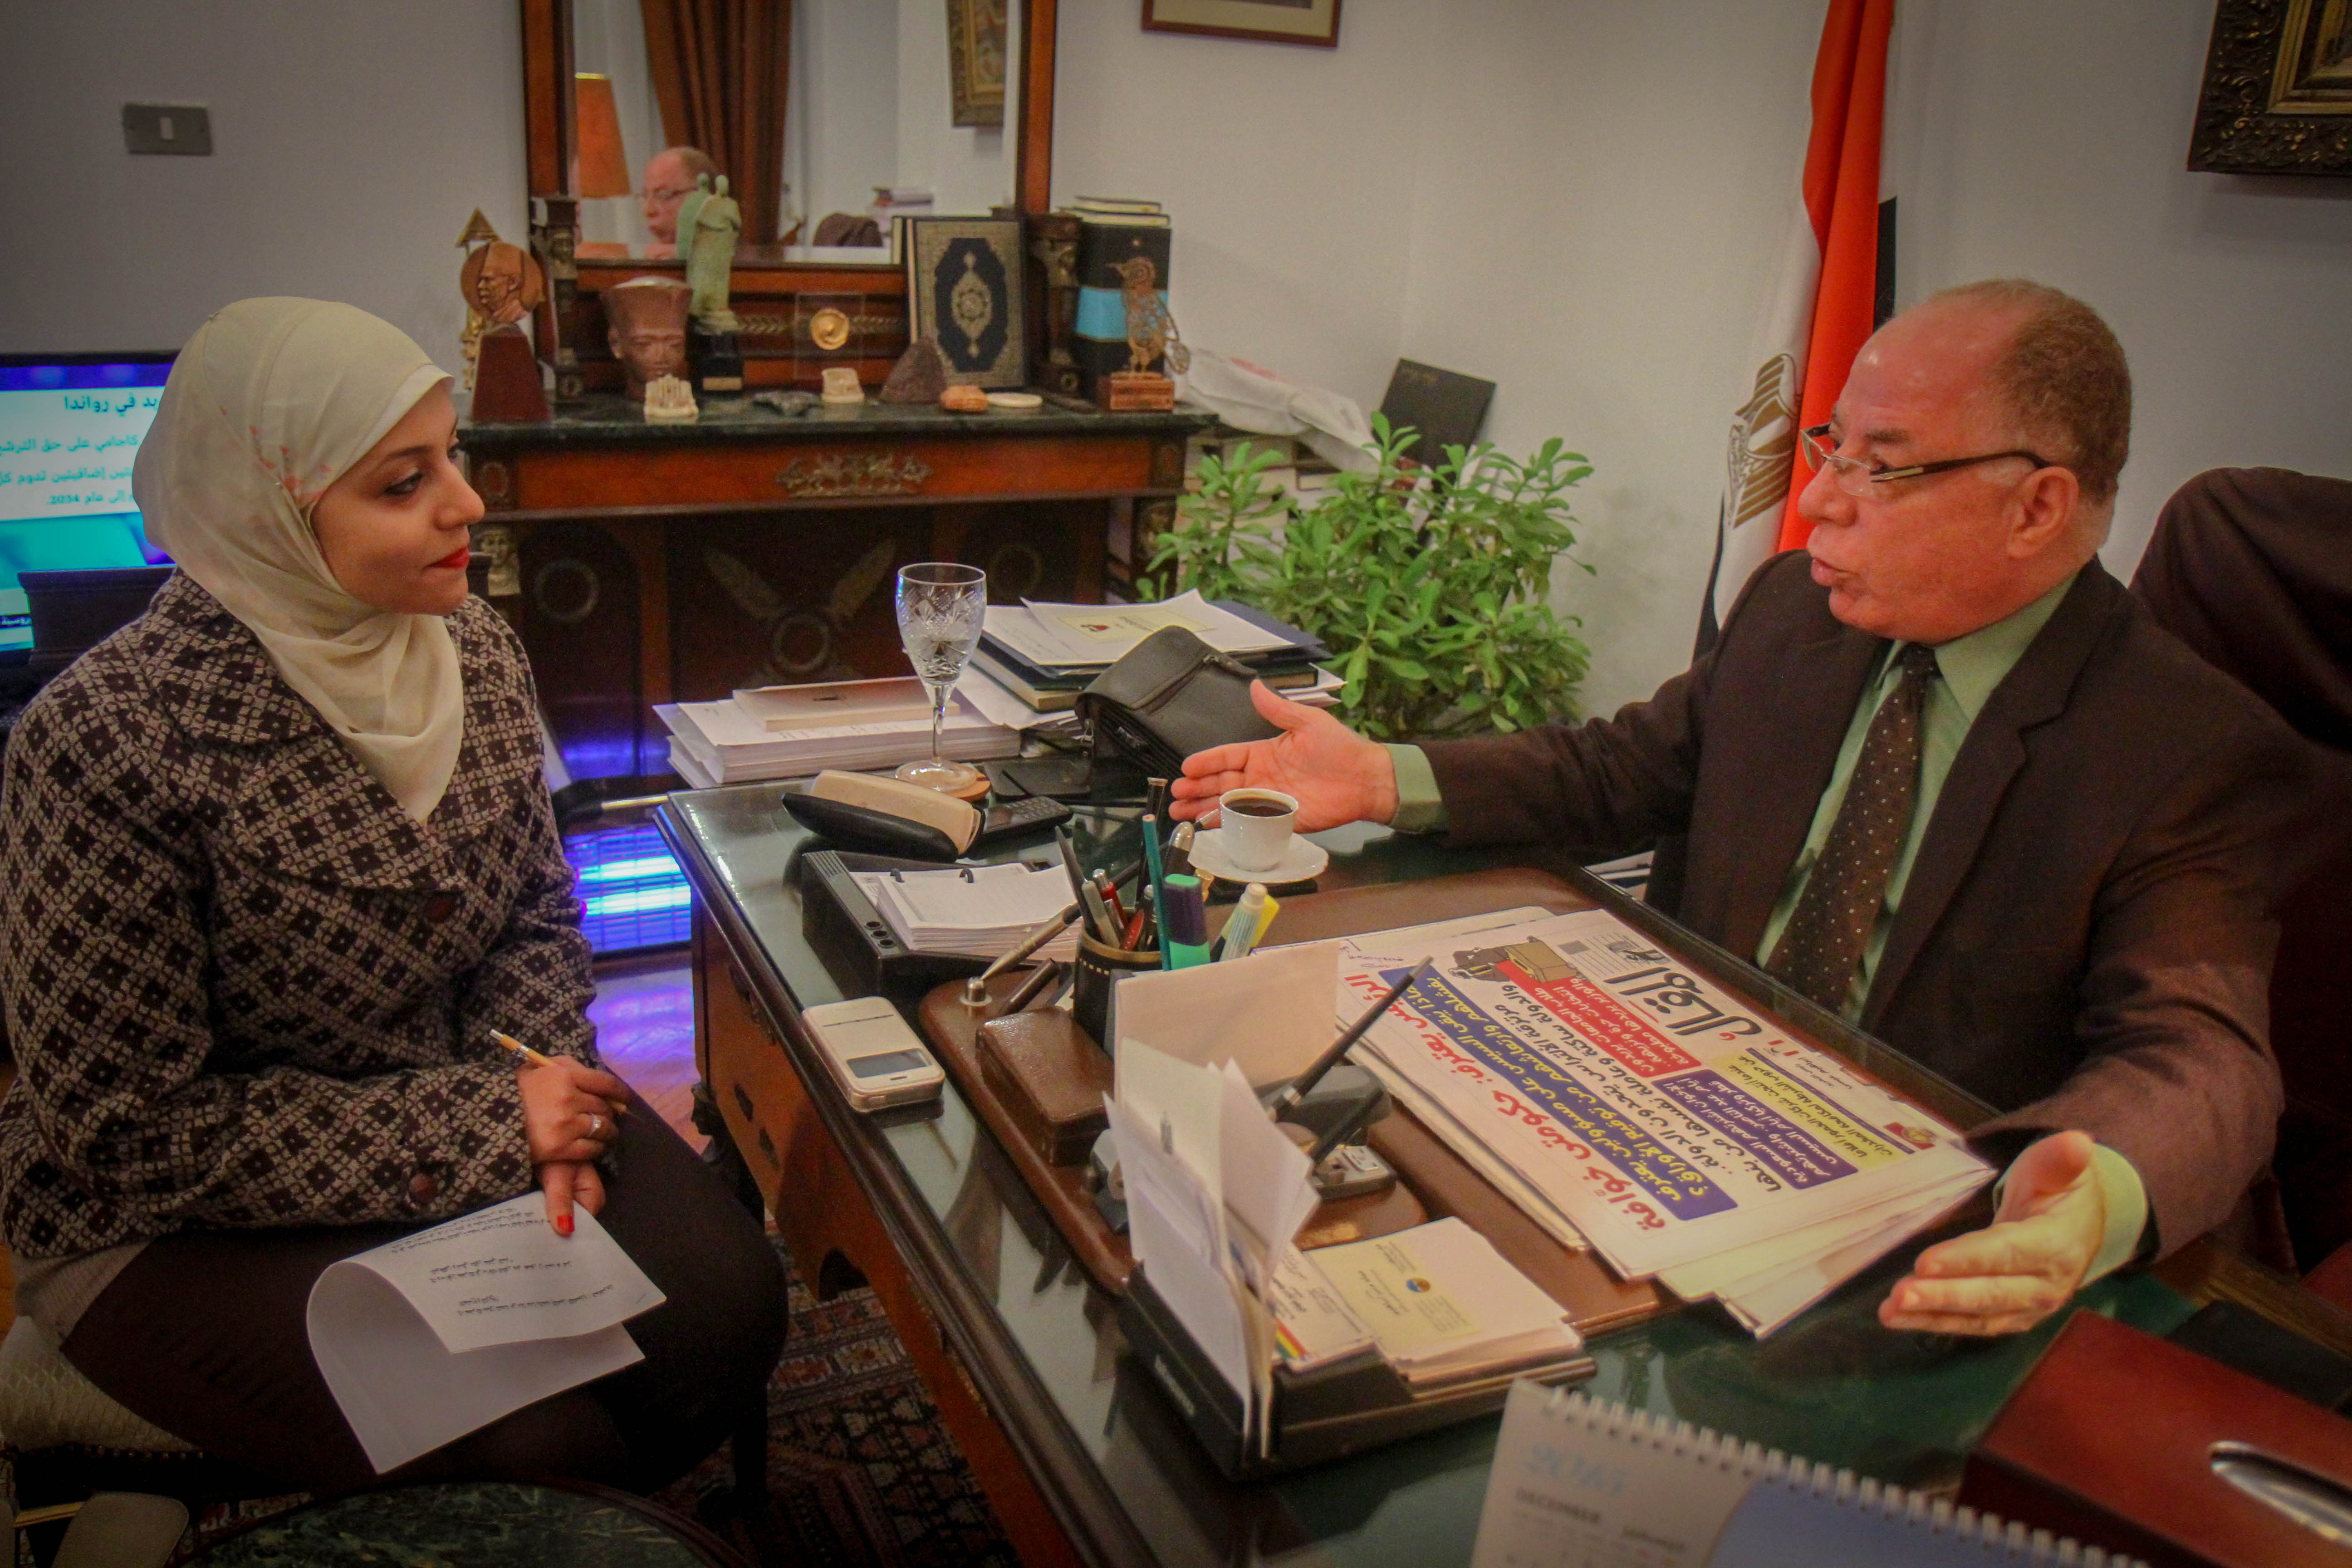 The Cairo Post reporter interviewing Minister of Culture Helmy al-Namnam at the Ministry headquarters in Zamalek, Cairo, on Dec. 19, 2015- THE CAIRO POST/ Amr Mostafa